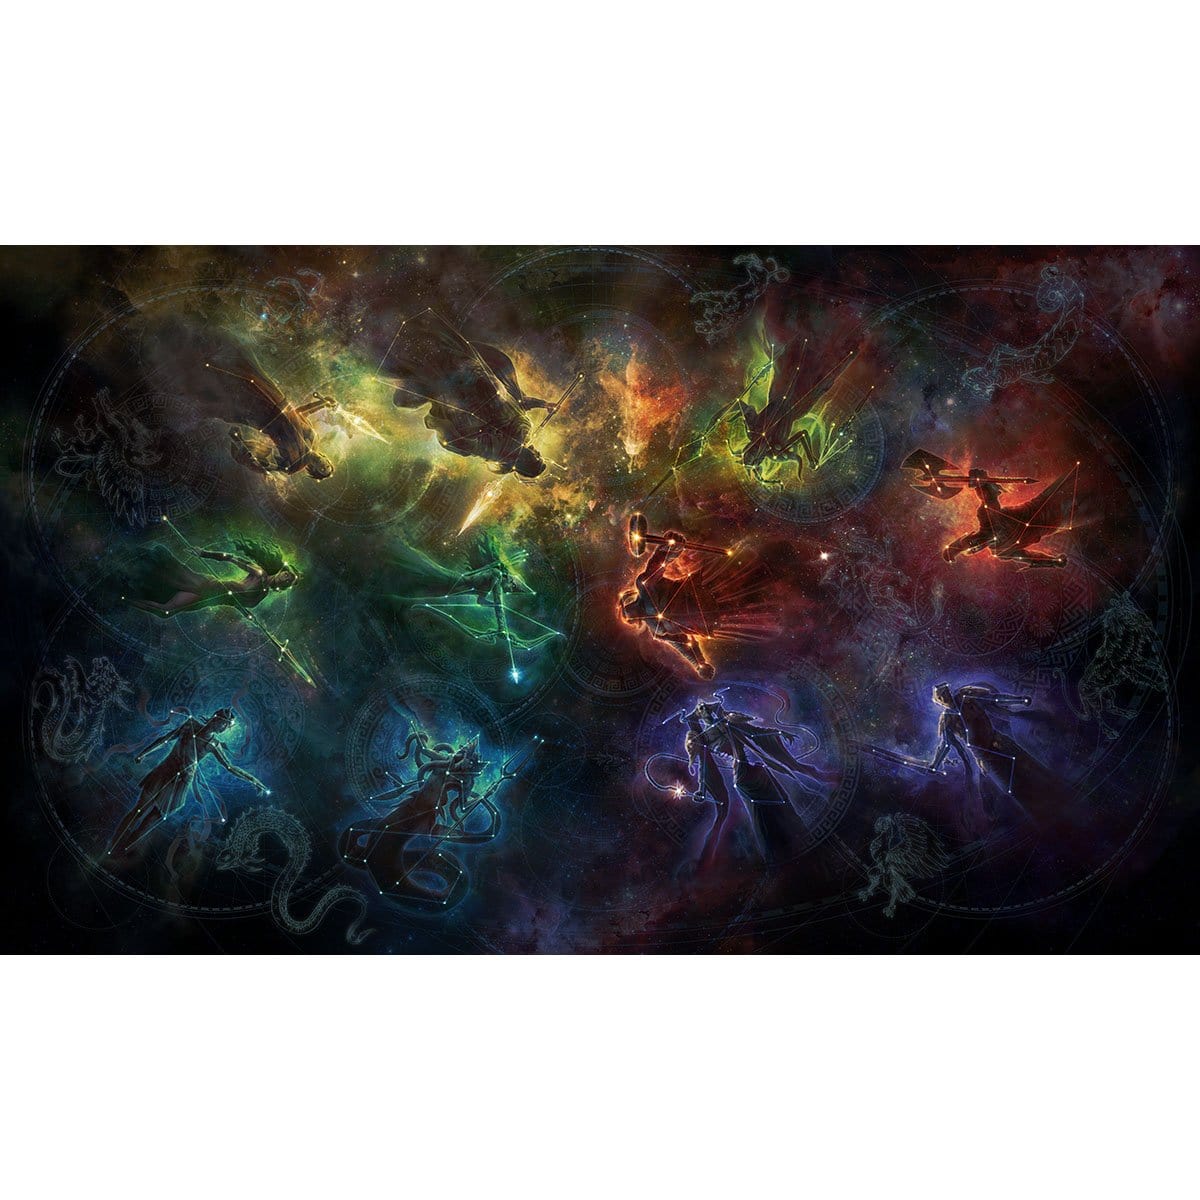 Theros Beyond Death Gods &amp; Demigods Constellation Print - Print - Original Magic Art - Accessories for Magic the Gathering and other card games